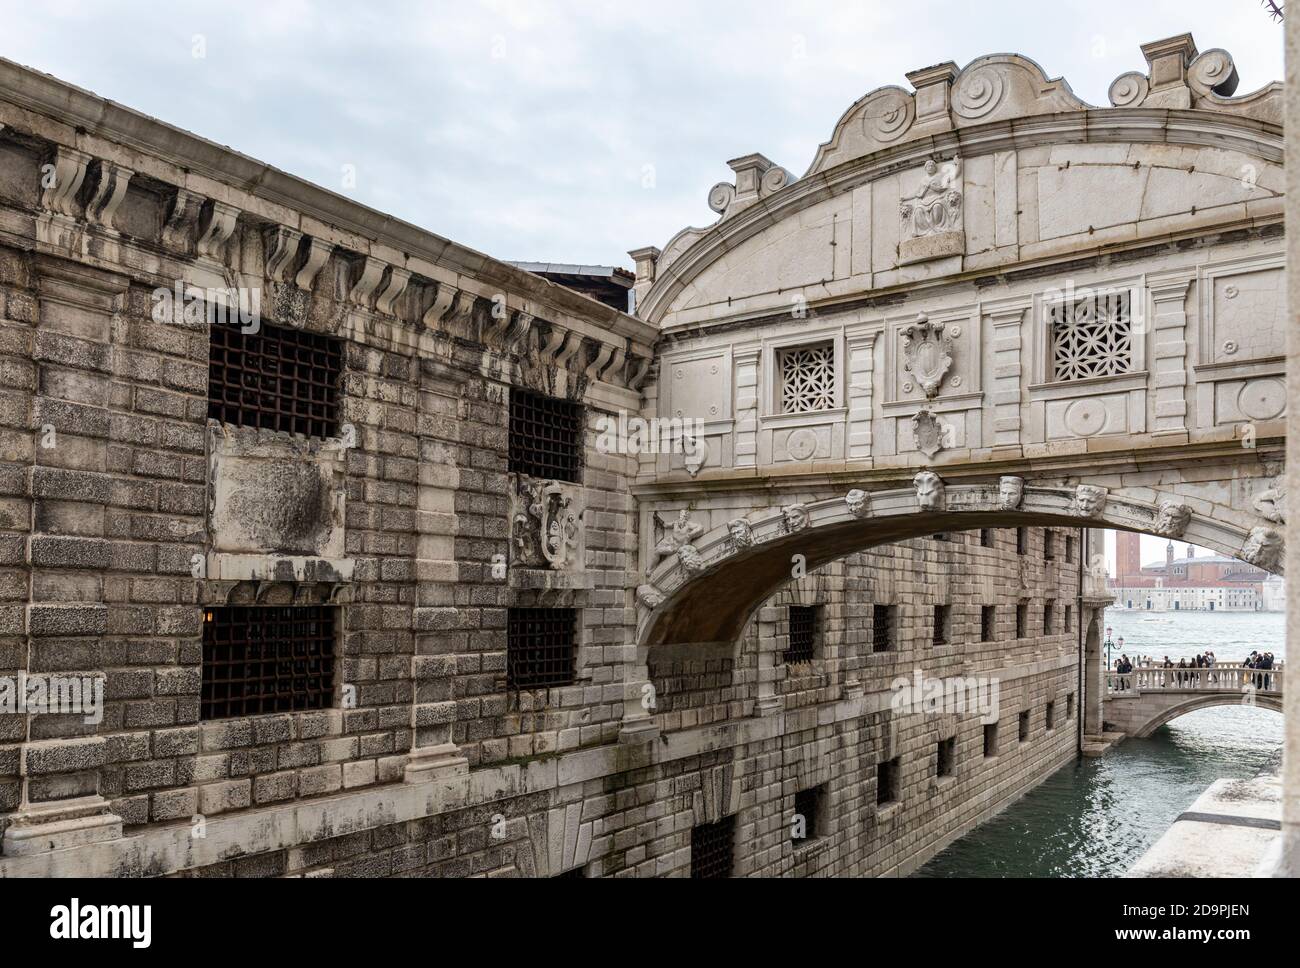 Close up of The “Ponte dei Sospiri” or “Bridge of Sighs” a world famous bridge connecting the Doges Palace to the Prisons, San Marco, Venice, Italy Stock Photo